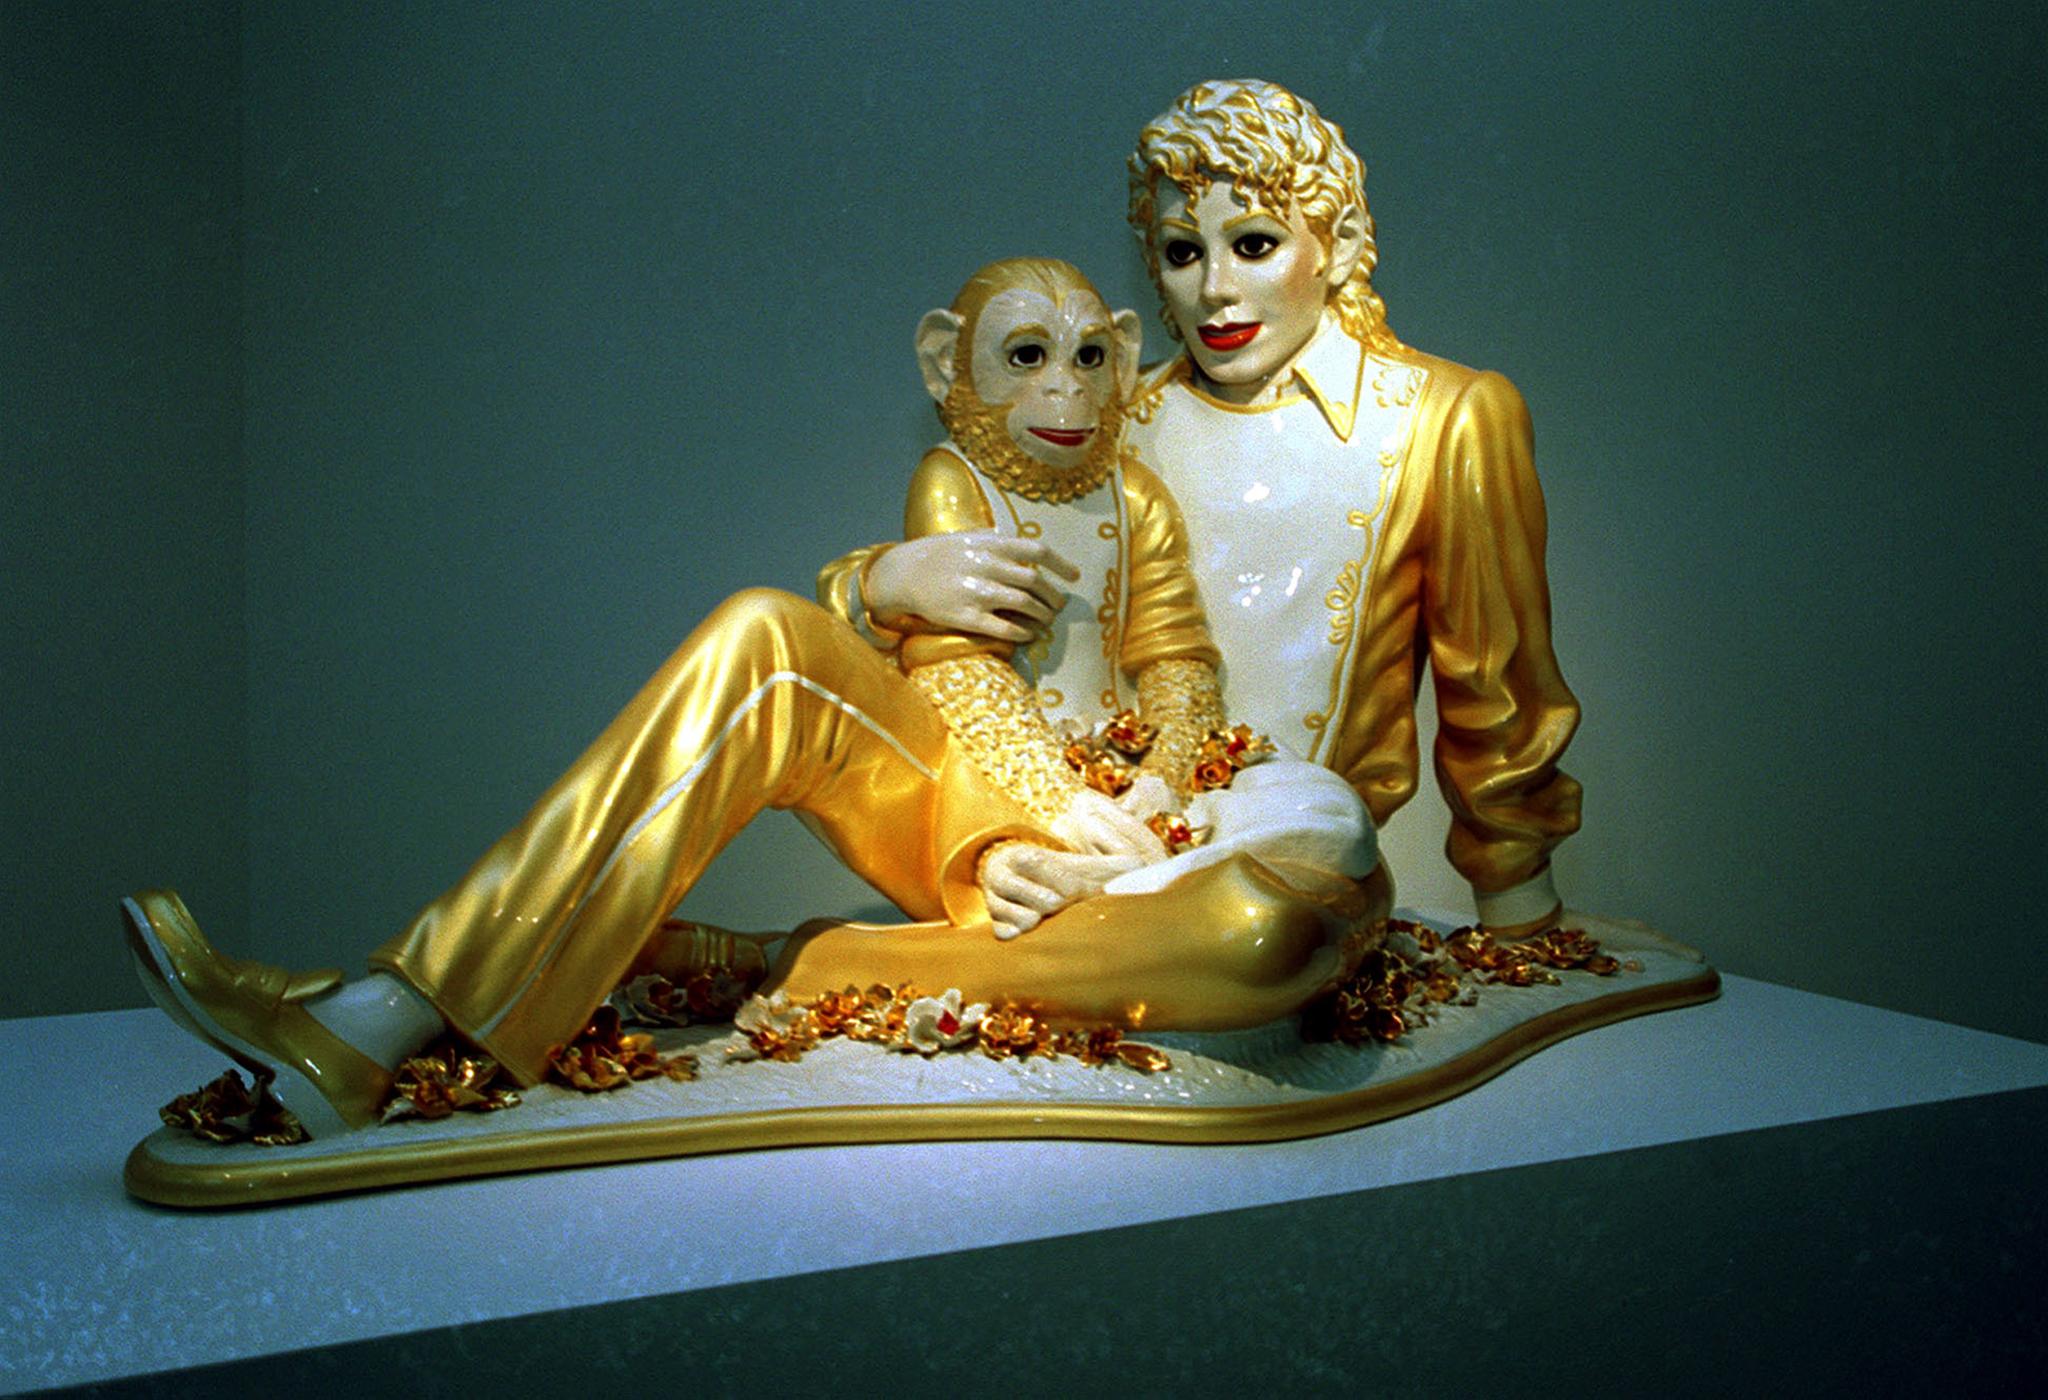 One of Jeffrey Koons’s sculptures of Michael Jackson and Bubbles